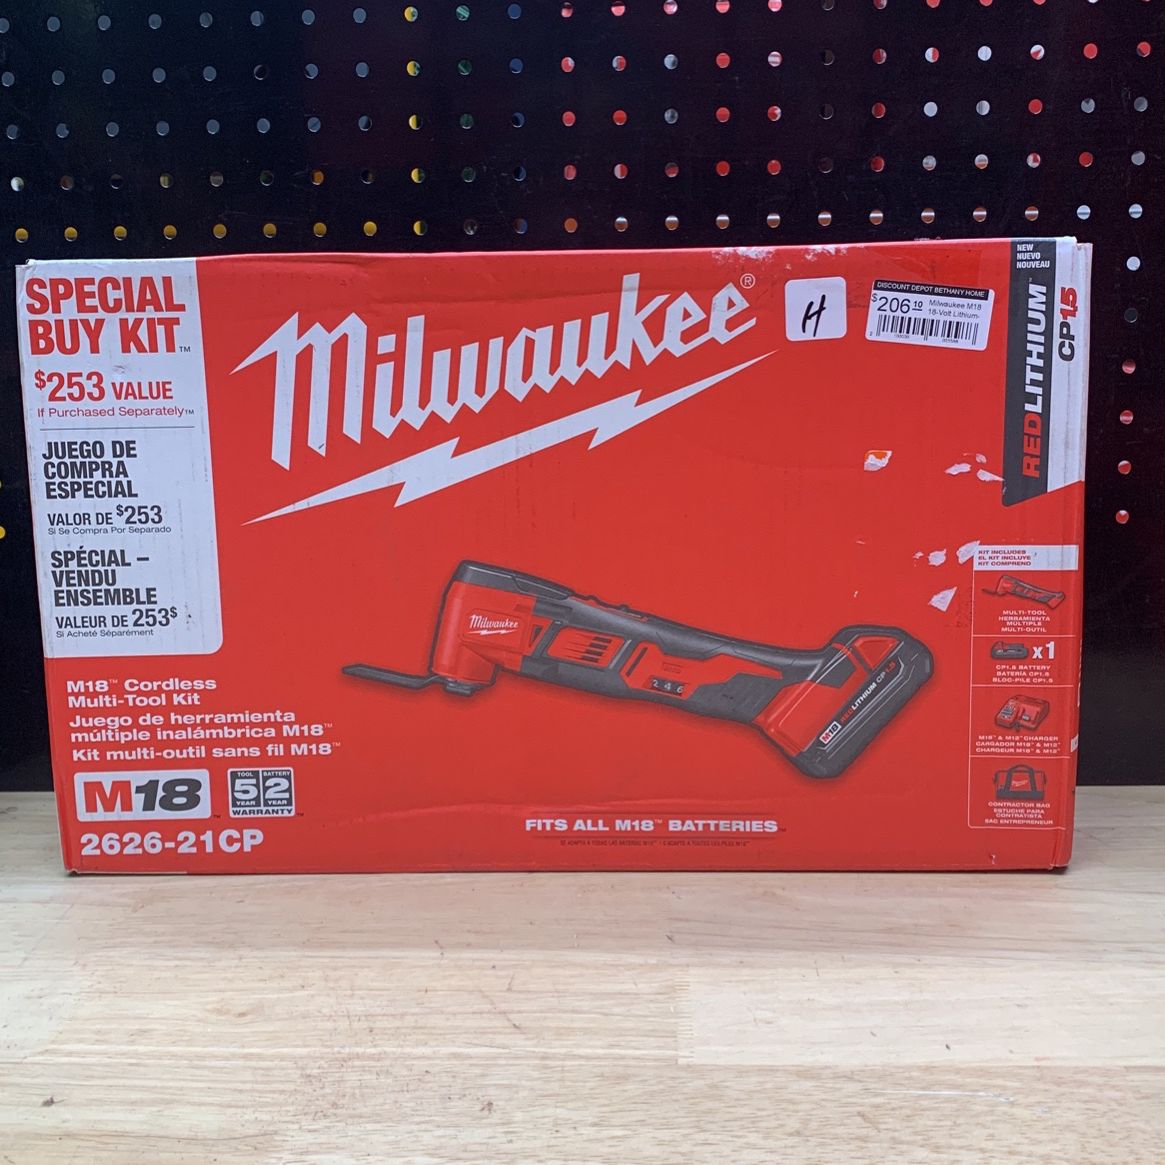 MILWAUKEE 2626-21CP 18V M18 LITHIUM-ION CORDLESS MULTI-TOOL KIT 1.5 AH for  Sale in Phoenix, AZ OfferUp